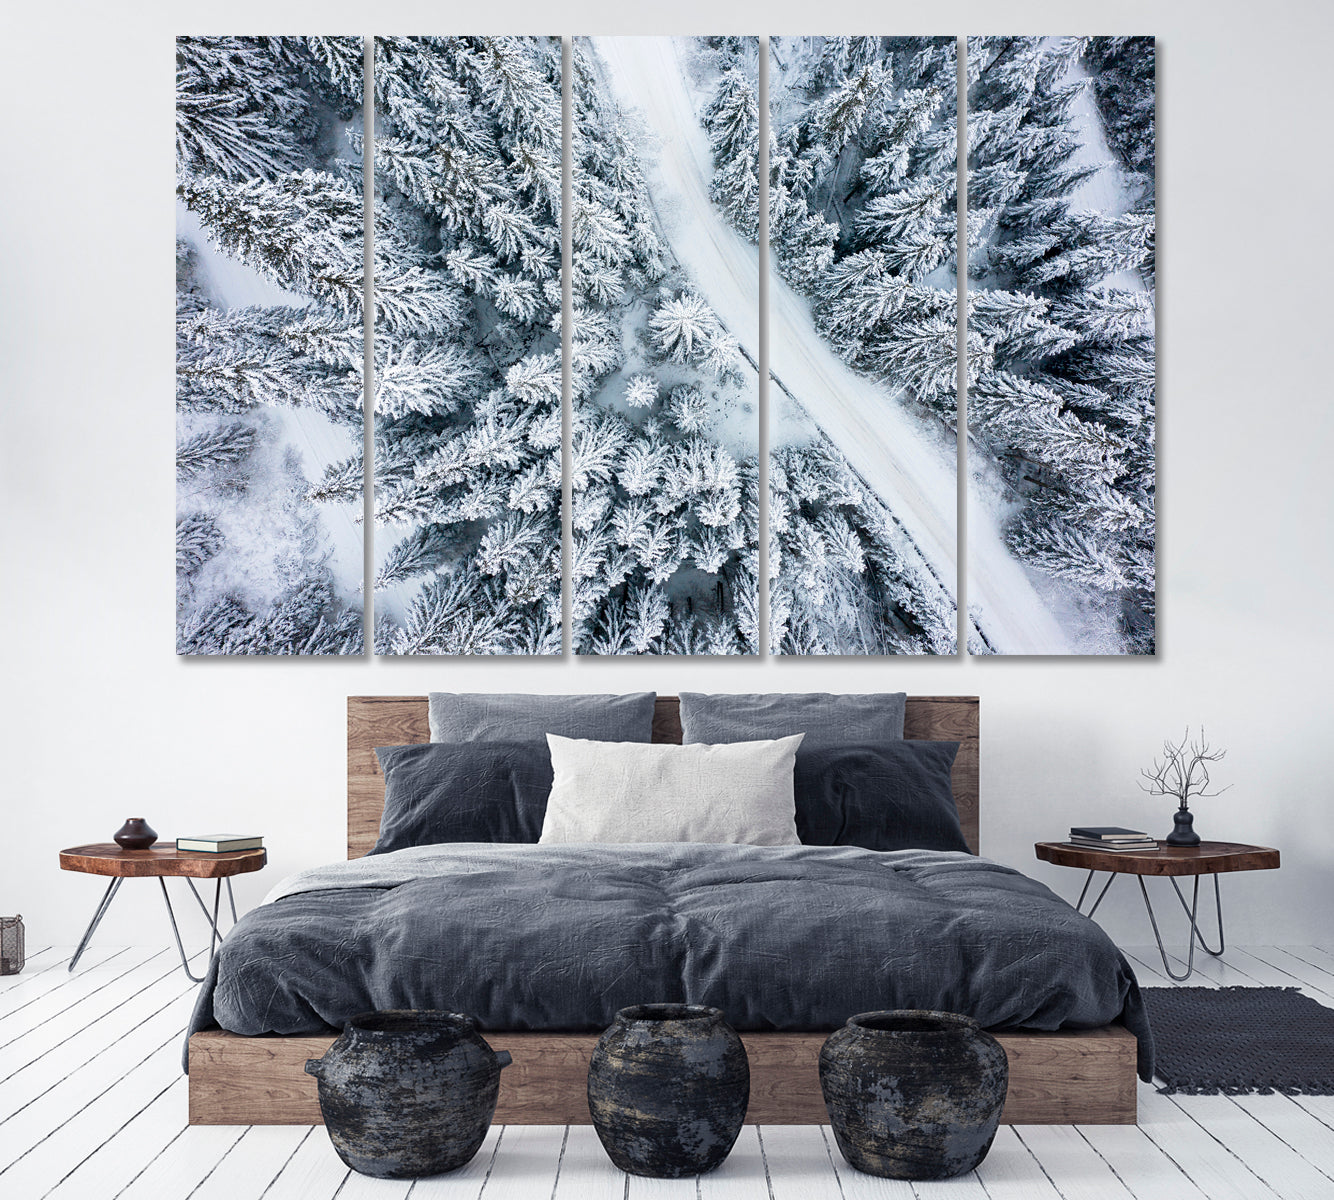 Snowy Road in Winter Forest Canvas Print ArtLexy 5 Panels 36"x24" inches 